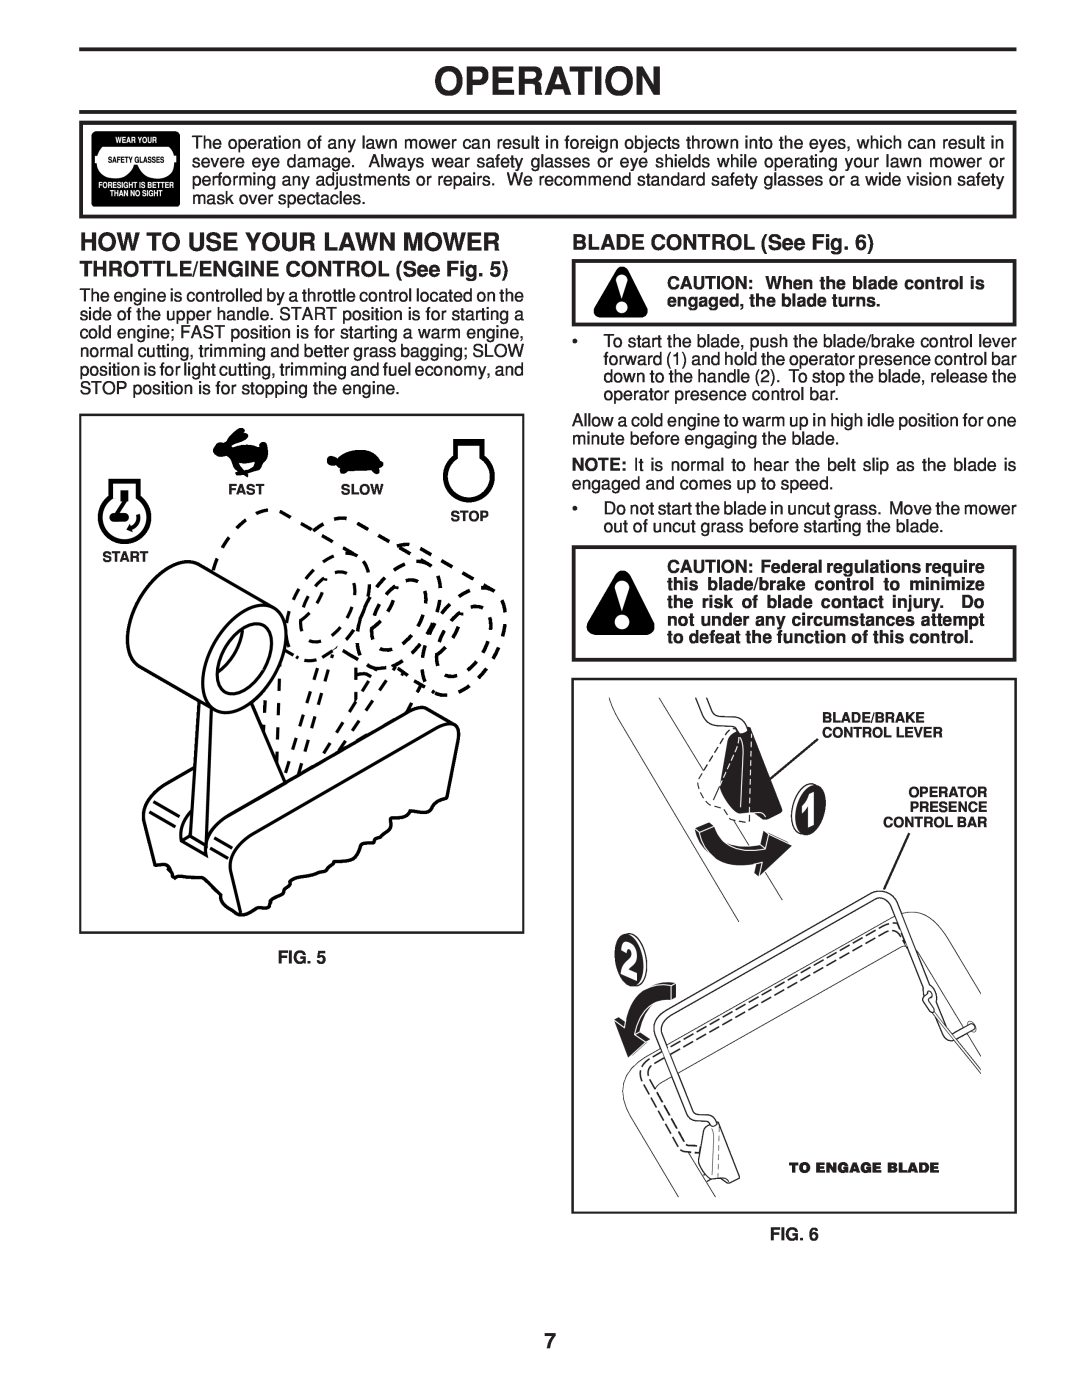 Husqvarna 961430104 warranty How To Use Your Lawn Mower, THROTTLE/ENGINE CONTROL See Fig, BLADE CONTROL See Fig, Operation 